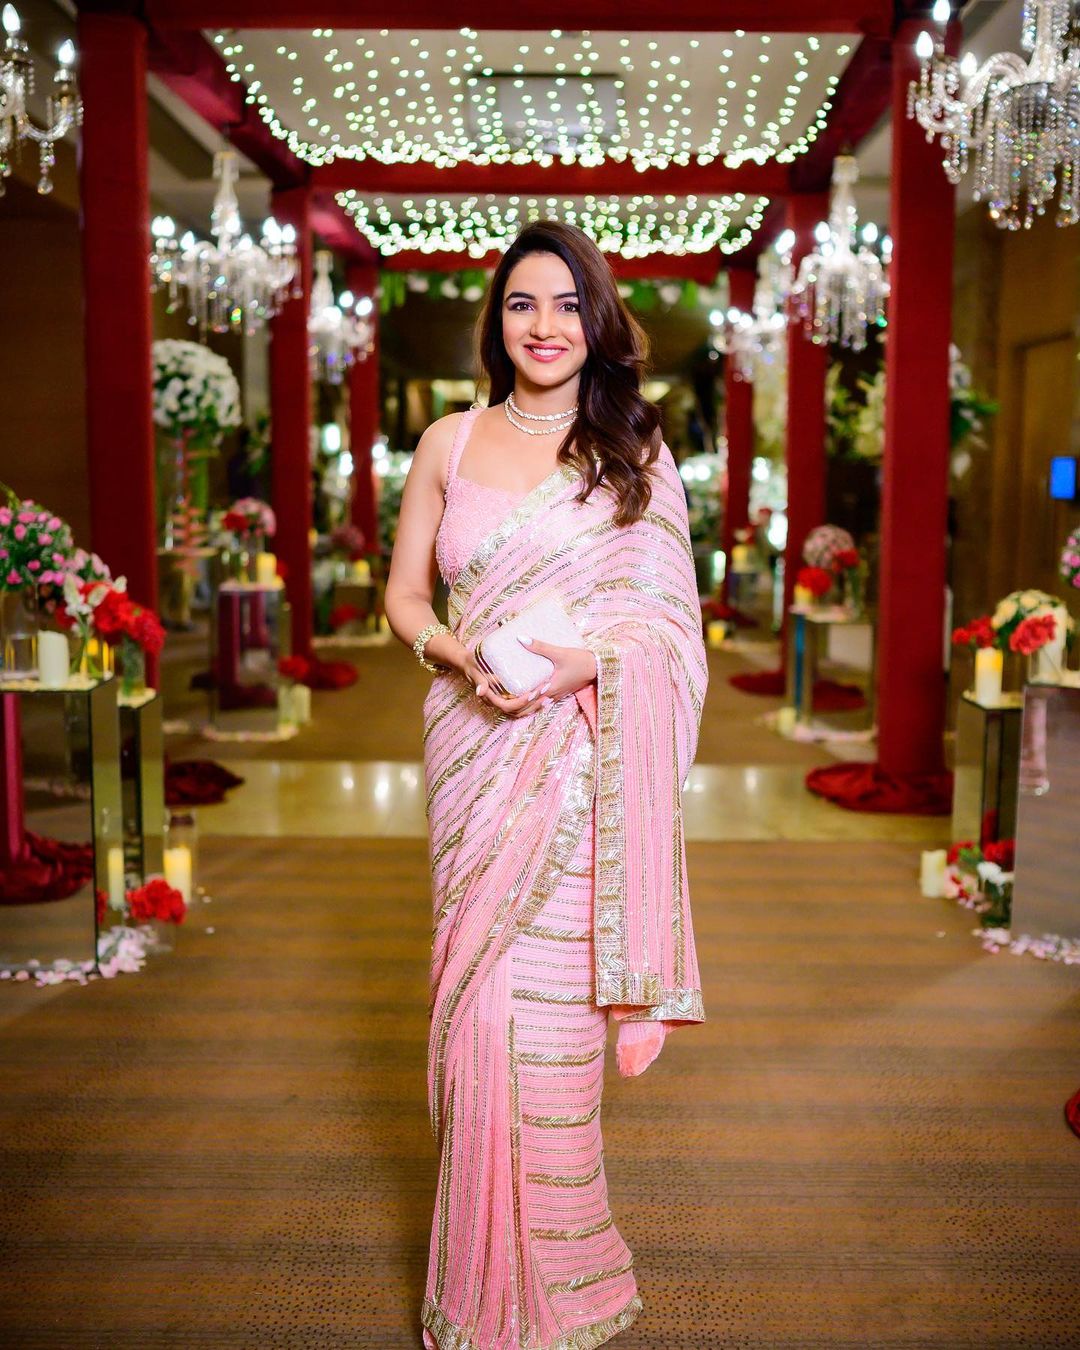 Jasmin Bhasin looks drop-dead gorgeous in the embellished pink saree. 